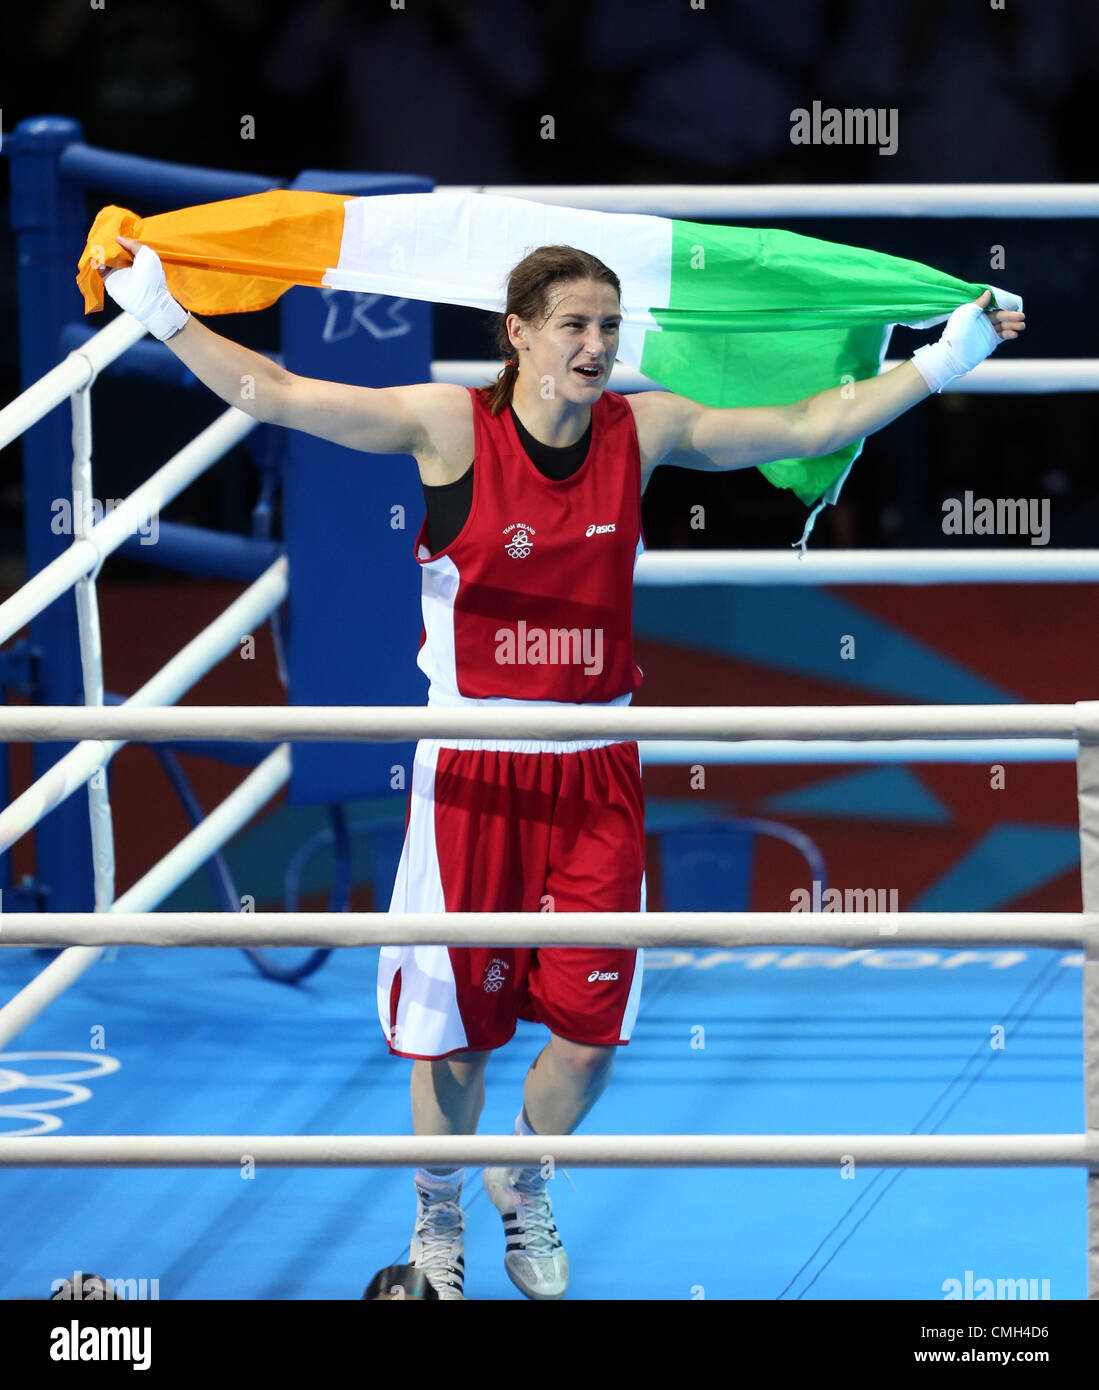 KATIE TAYLOR nimmt GOLD Irland Excel ARENA LONDON ENGLAND 9. August 2012 Stockfoto